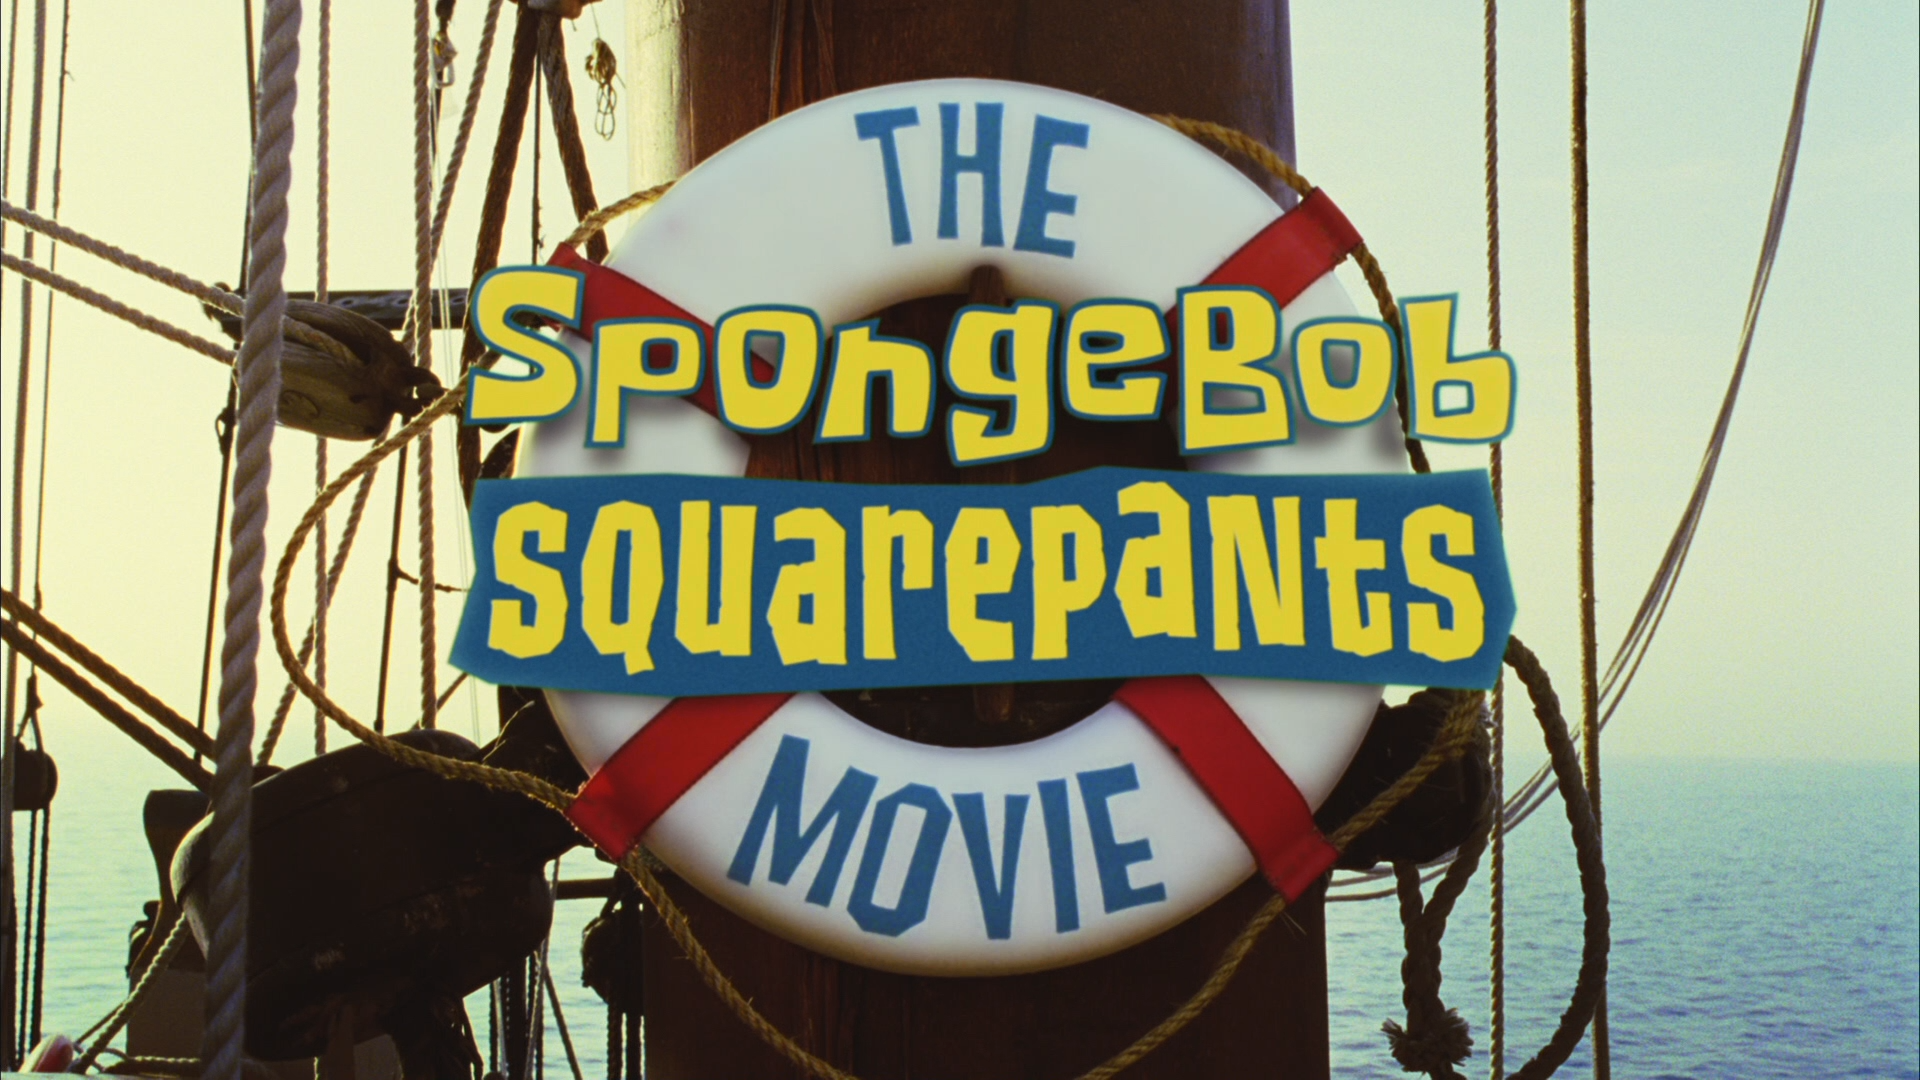 https://static.wikia.nocookie.net/spongebob/images/a/ab/Movie.png/revision/latest?cb=20200110163322